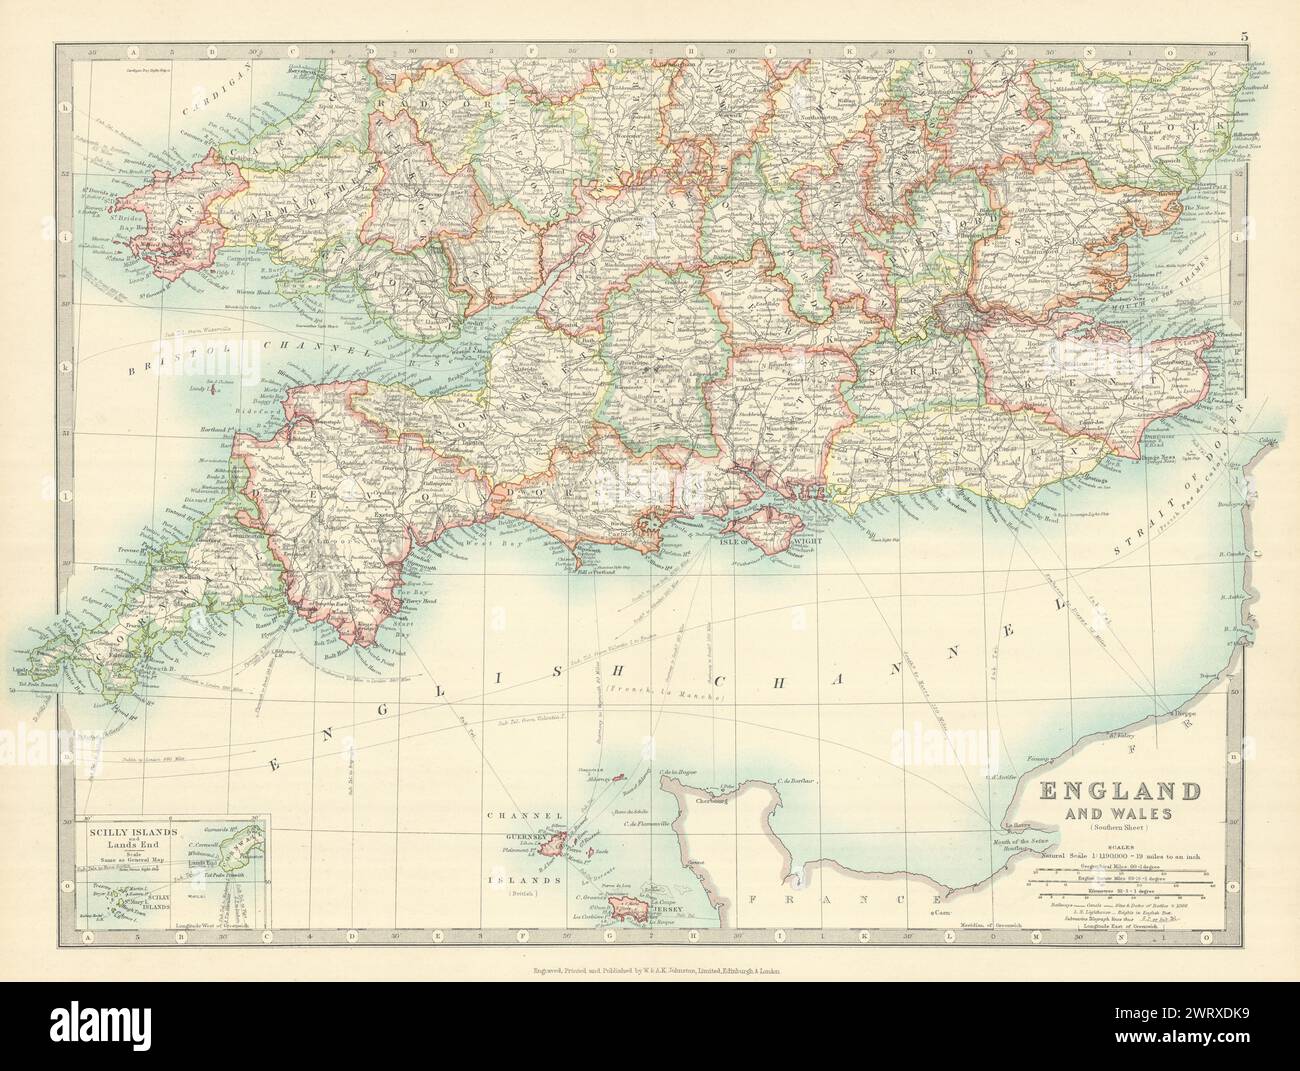 SOUTHERN ENGLAND & WALES. Shows Worcestershire enclaves. JOHNSTON 1913 old map Stock Photo